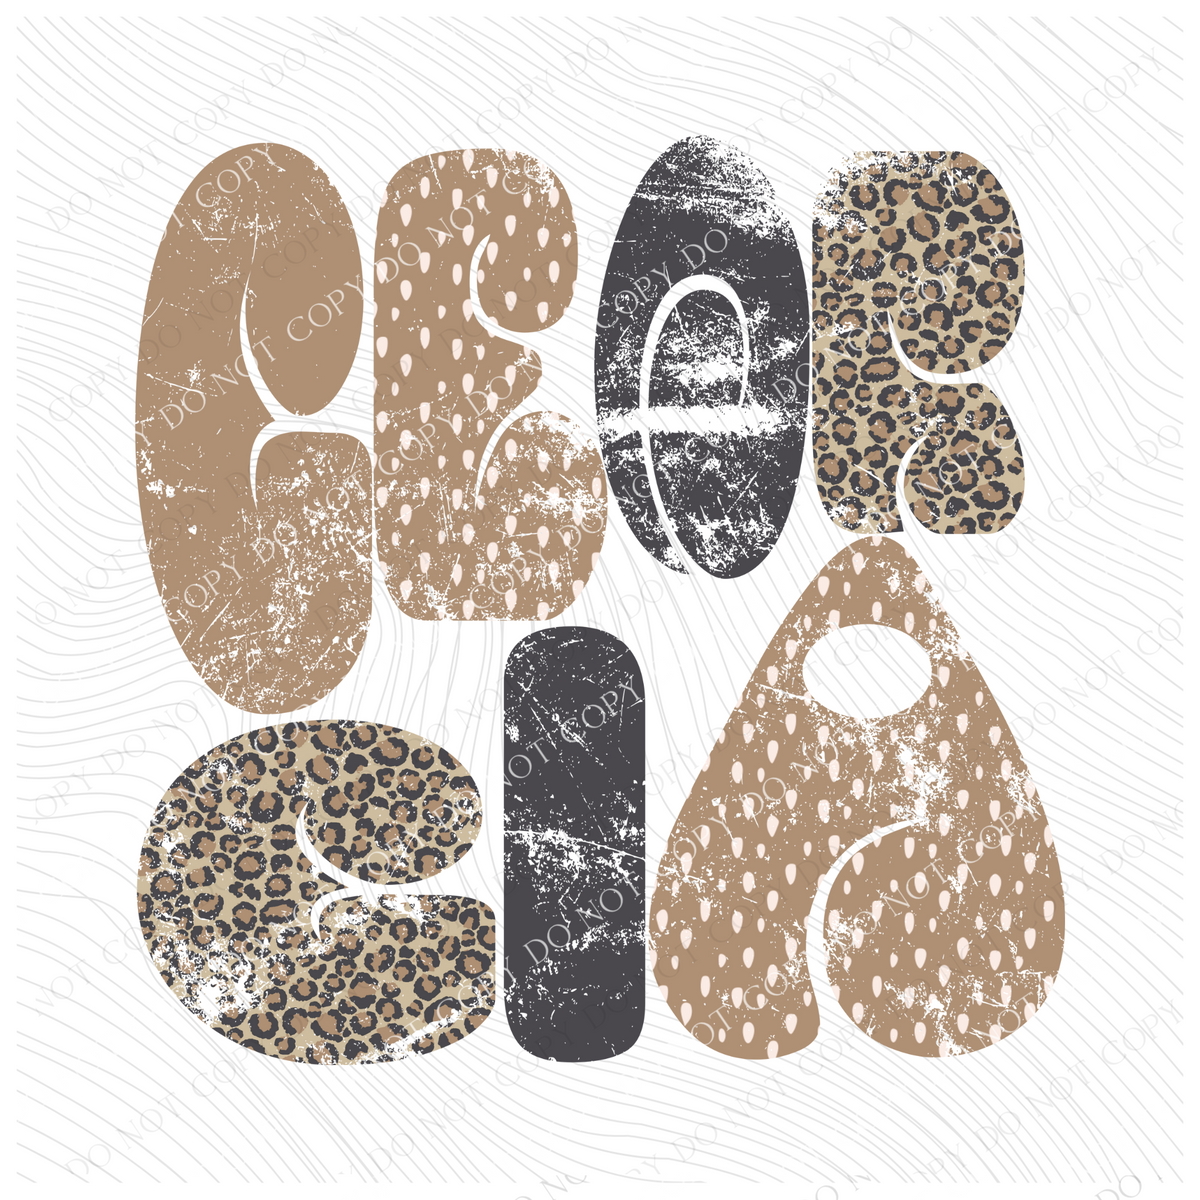 Georgia Chubby Retro Distressed Leopard print in tones of Tans & Faded Black Digital Design, PNG